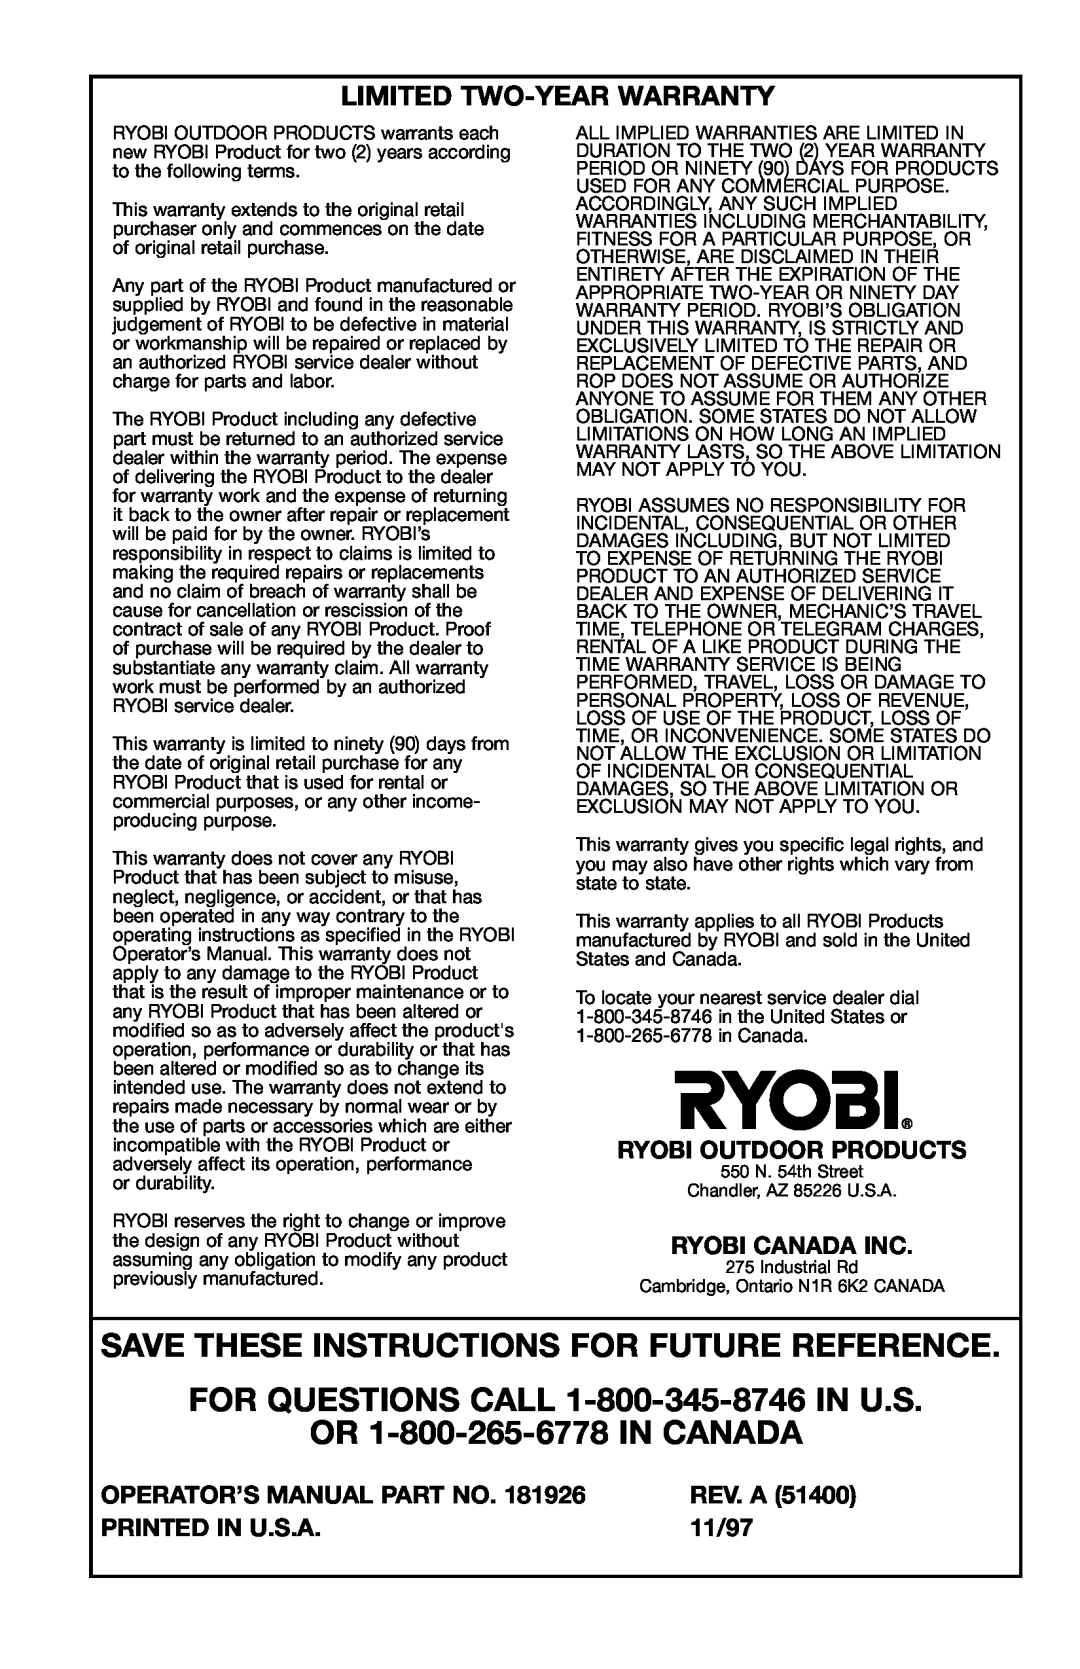 Ryobi 170r manual Save These Instructions For Future Reference, Limited Two-Yearwarranty, Ryobi Outdoor Products, 11/97 